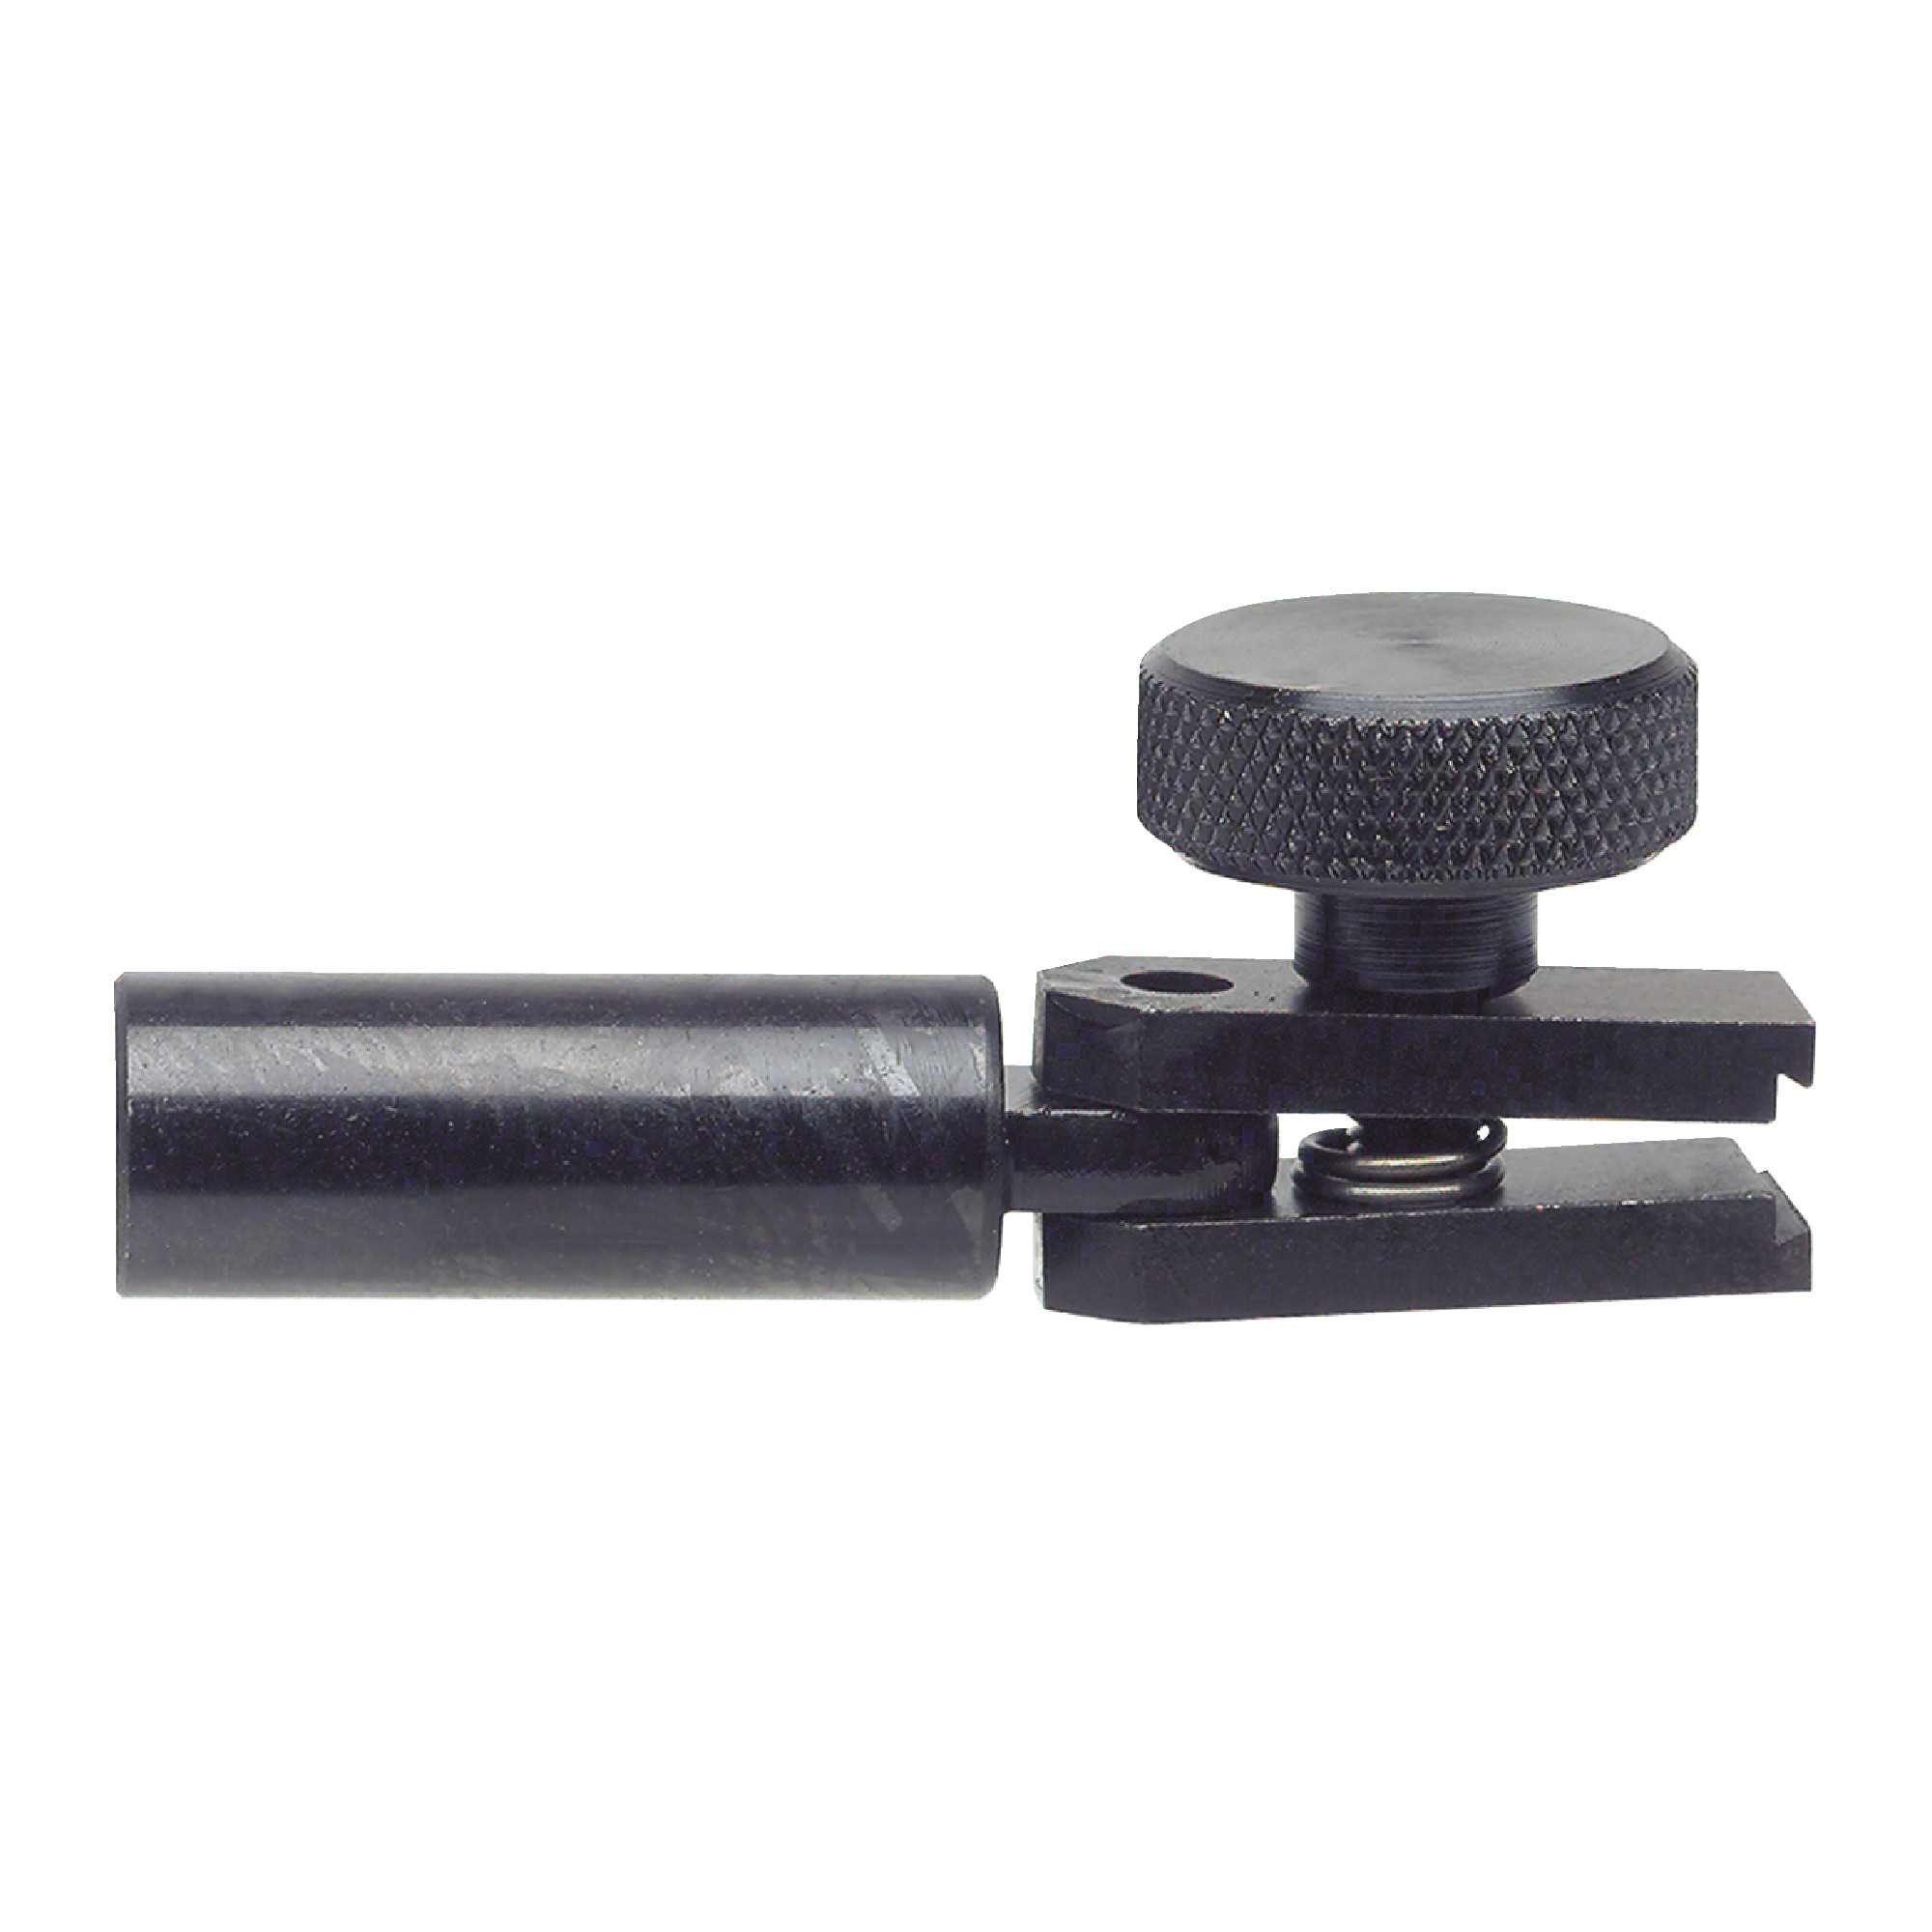 Short Swivel Support for Dial Test Indicator